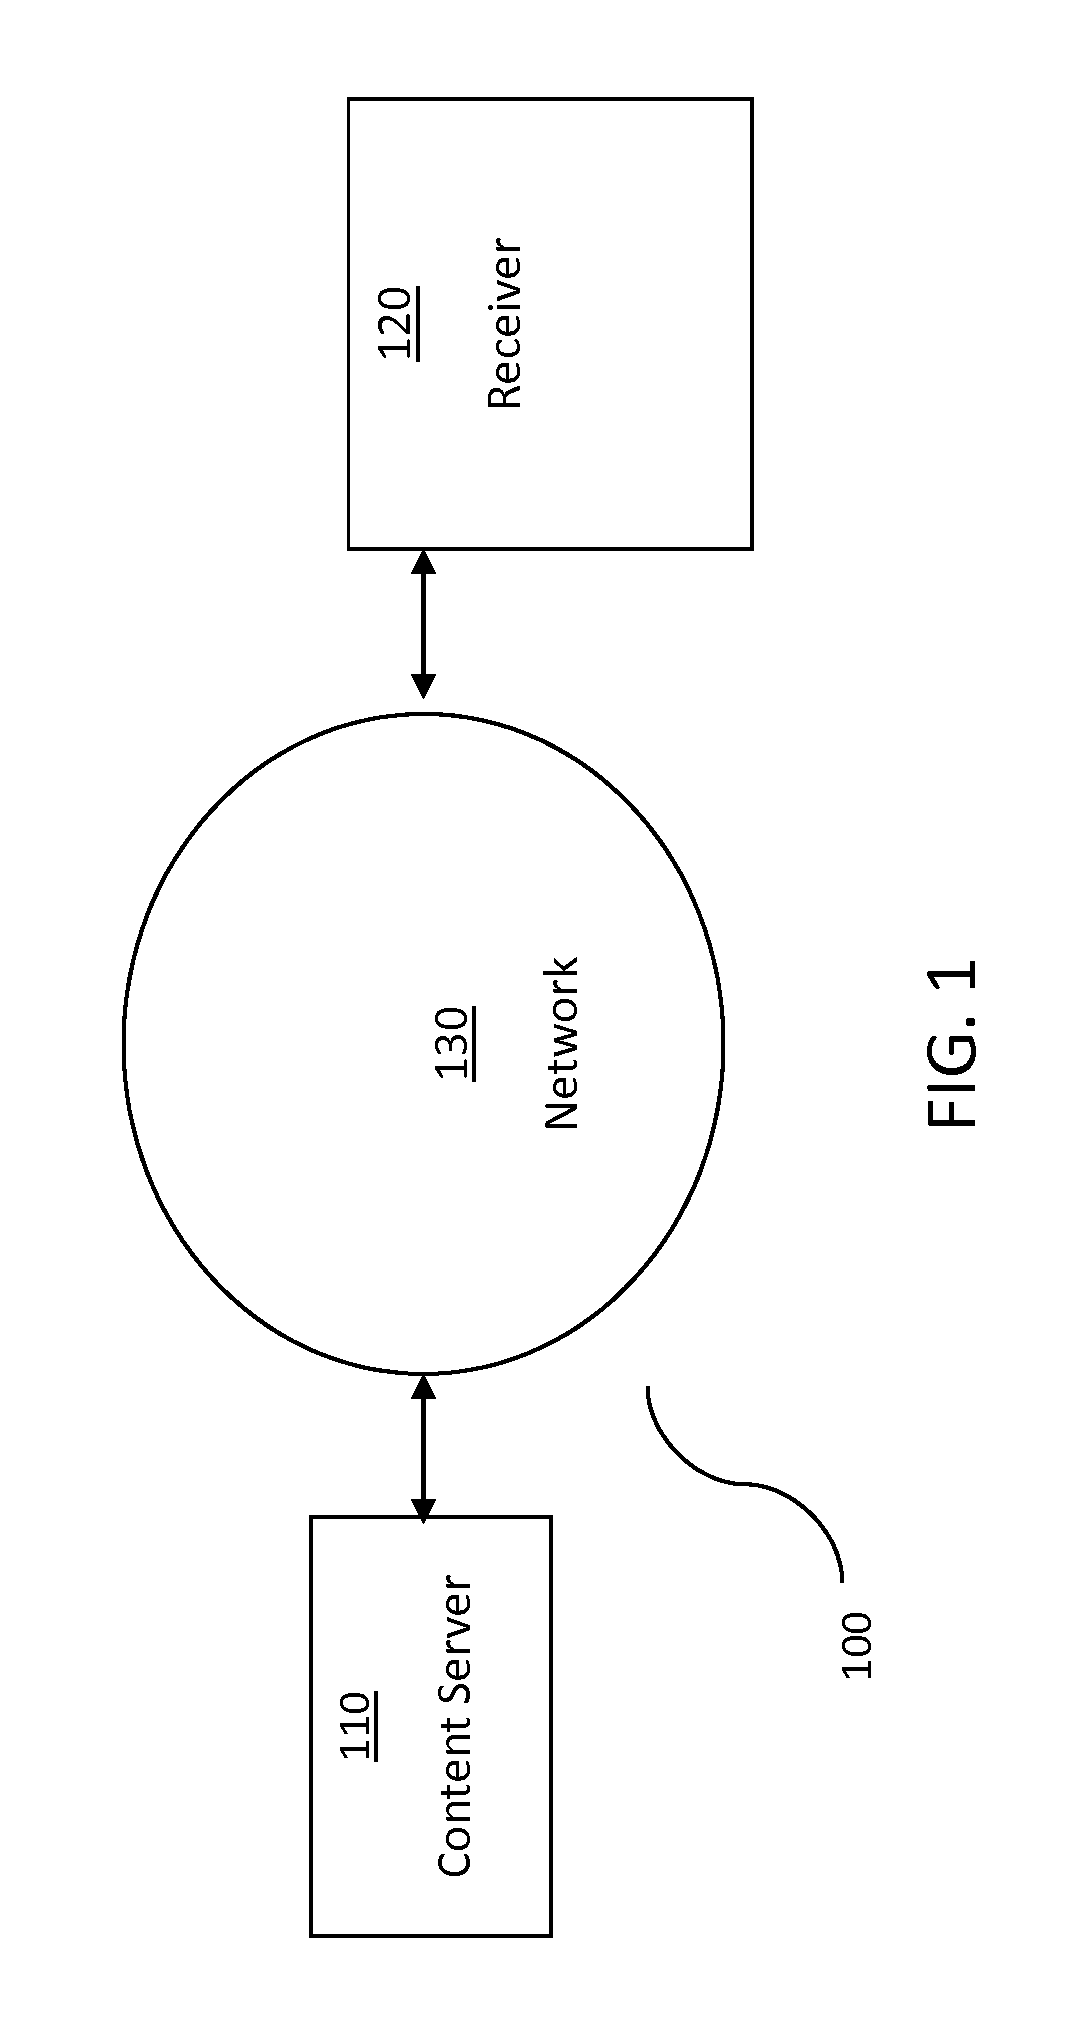 Method and System for Predicting Adverse Drug Reactions Using BioAssay Data